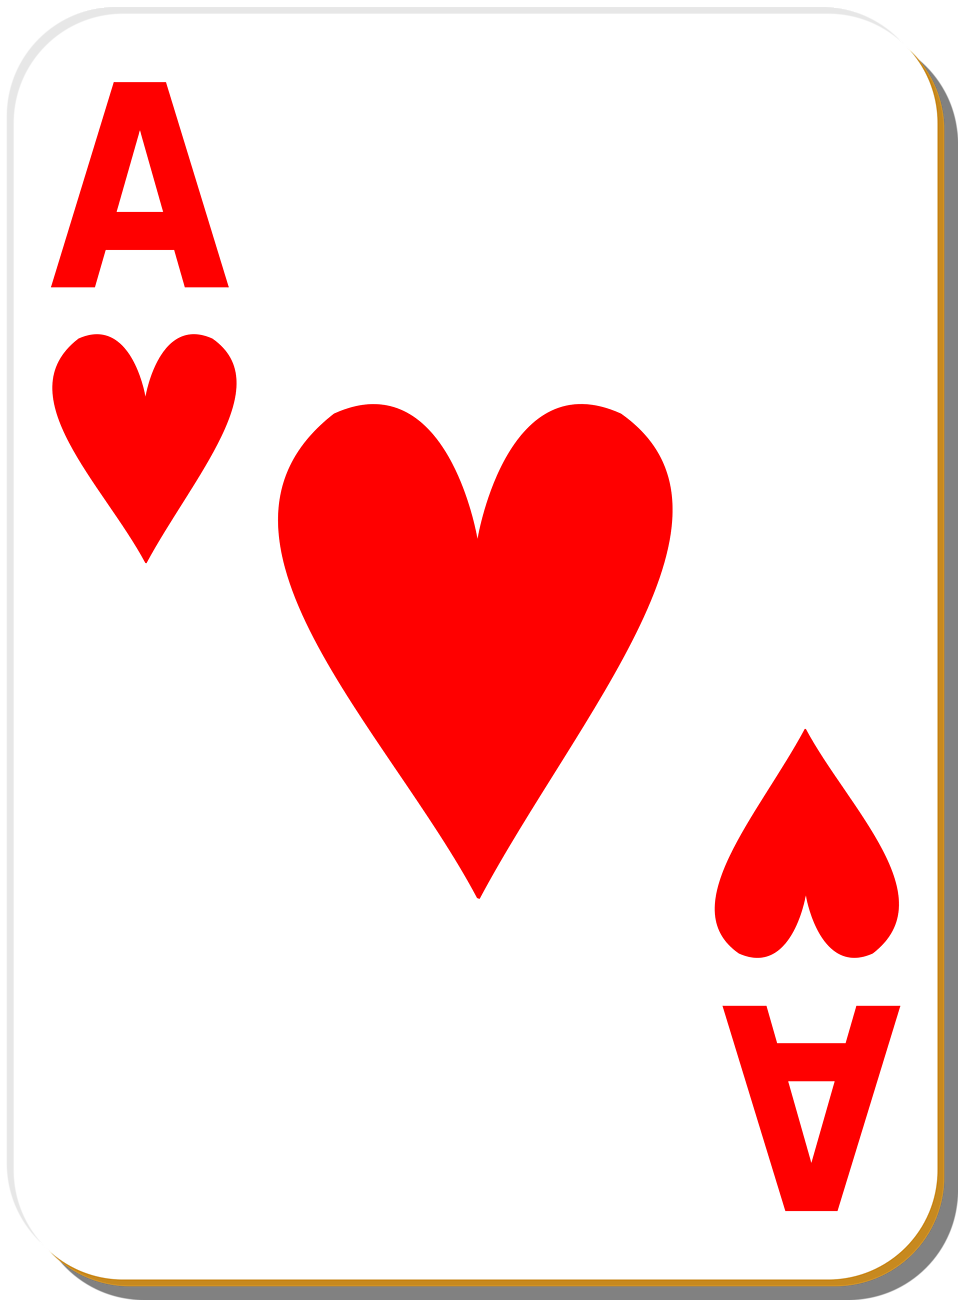 playing card clipart free download - photo #15